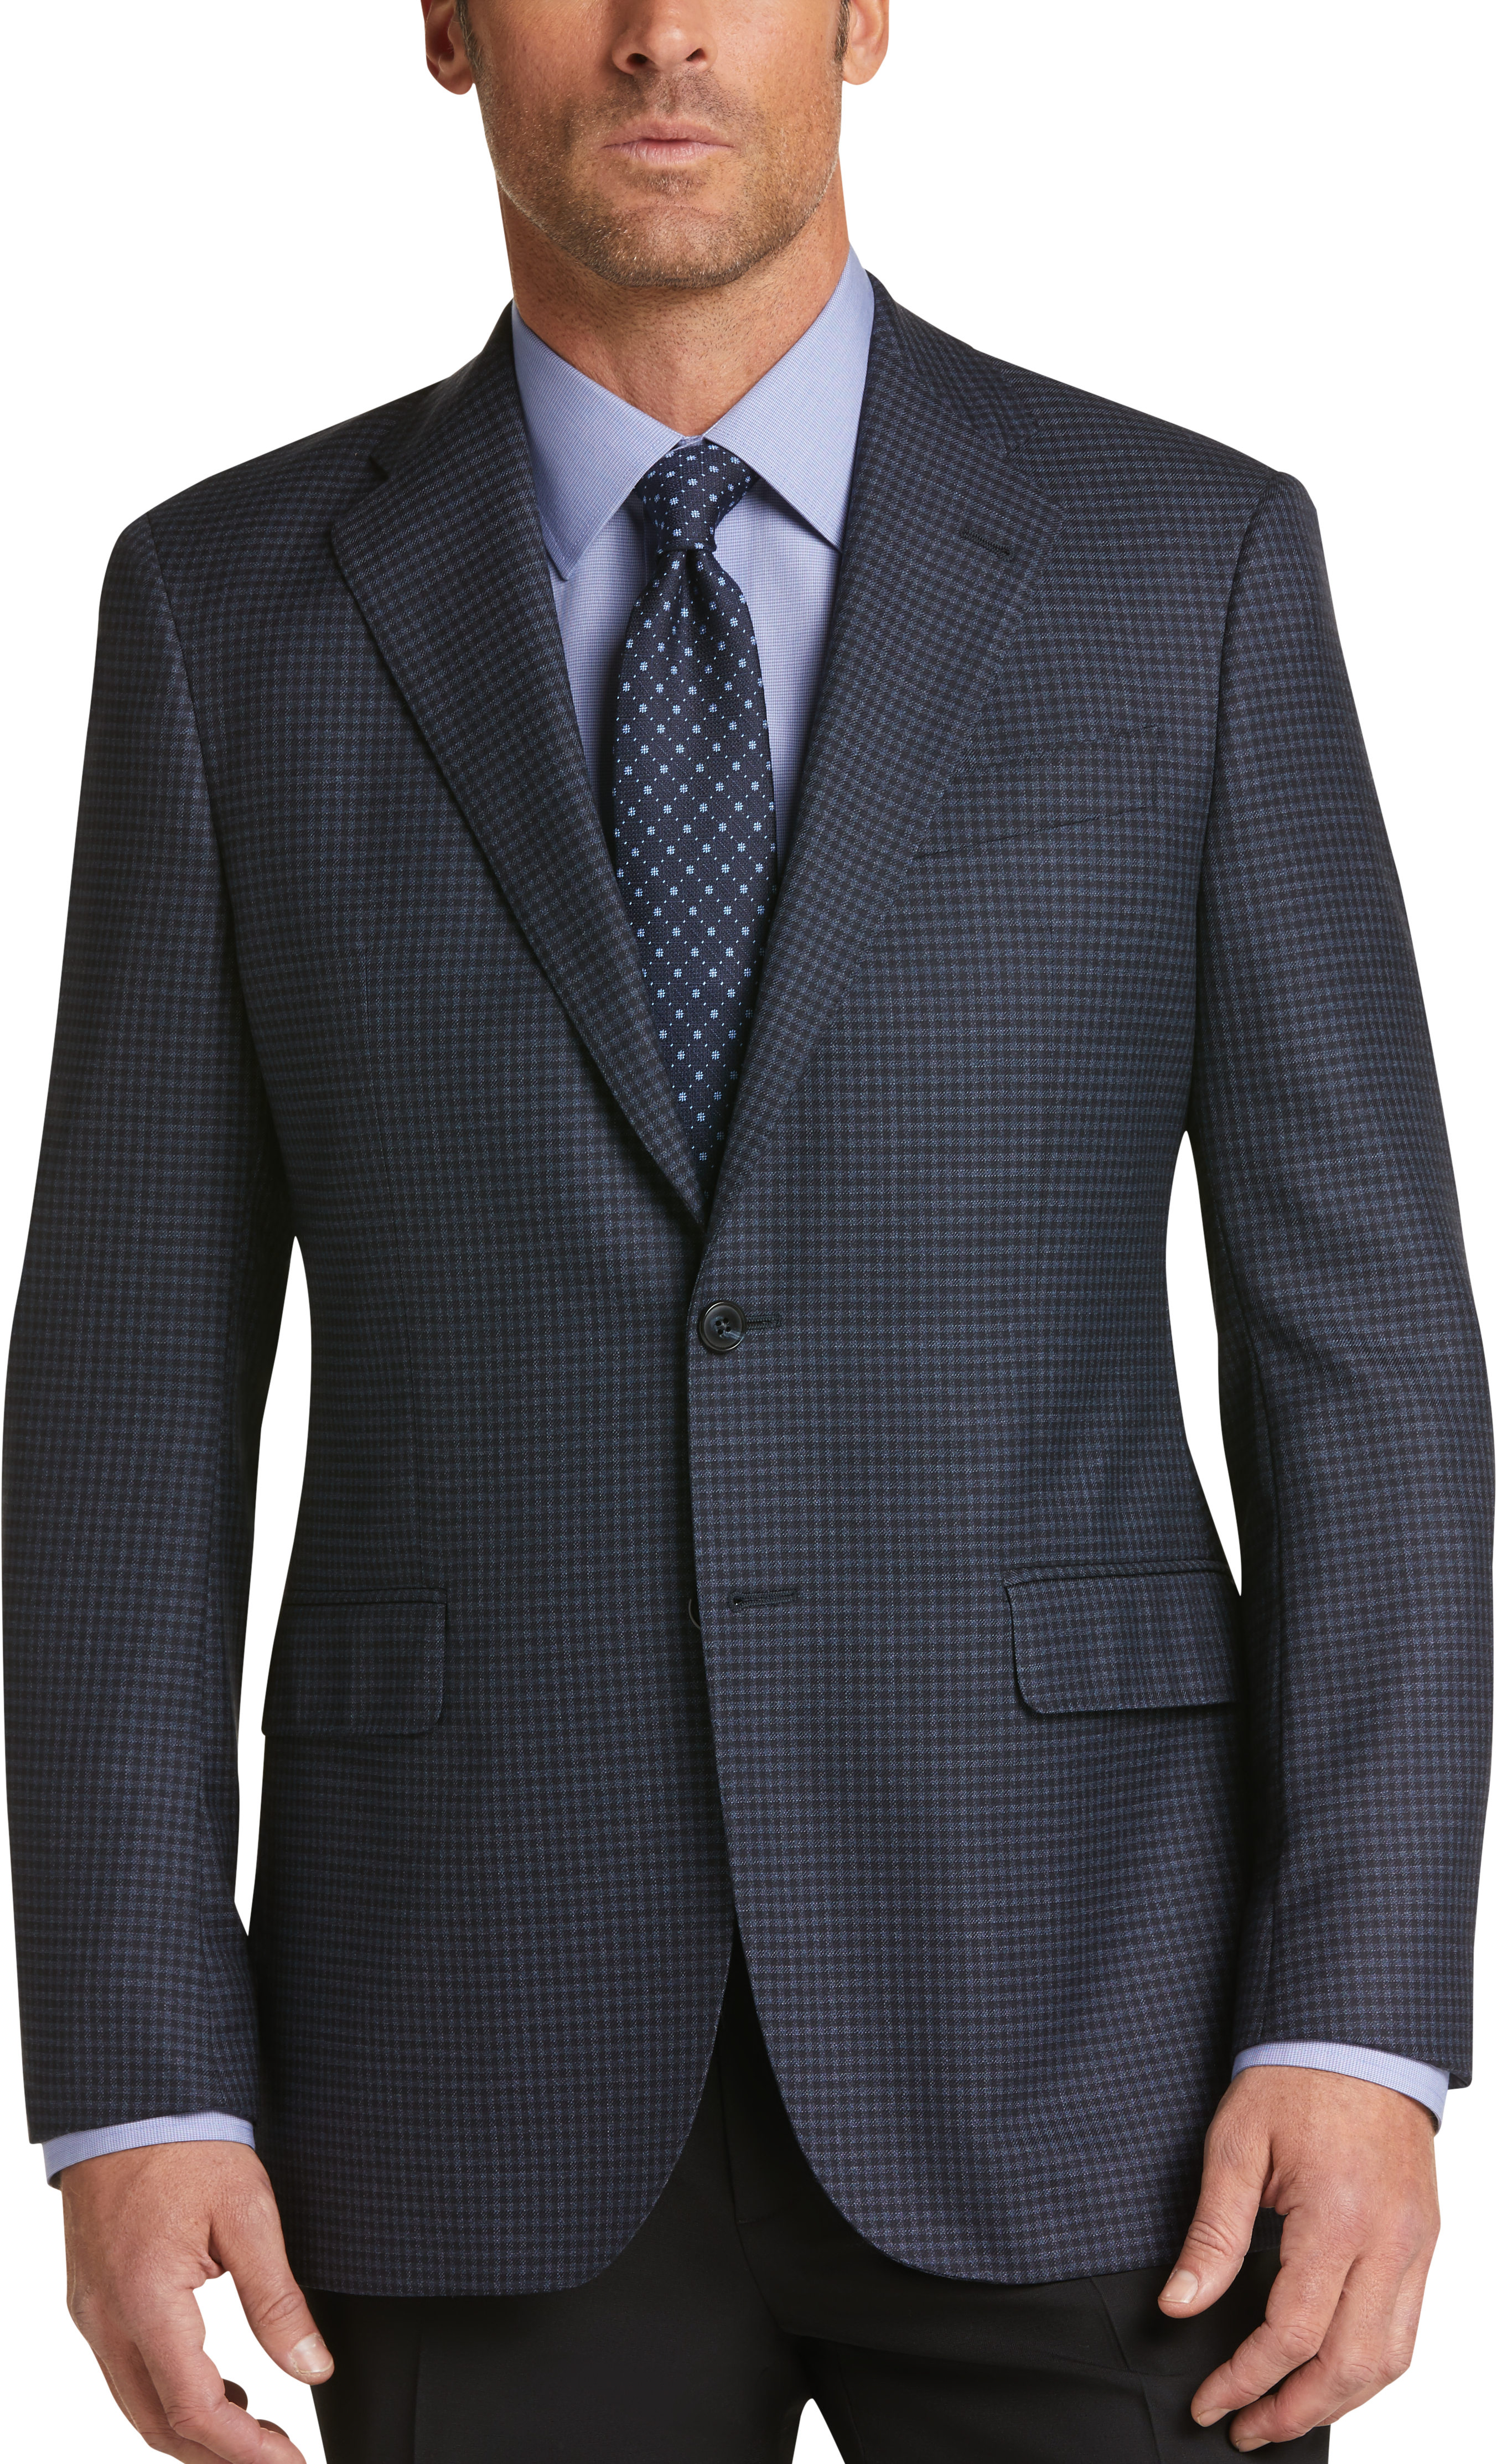 Men's Clothing Clearance Suits, Dress Shirts & More | Men's Wearhouse